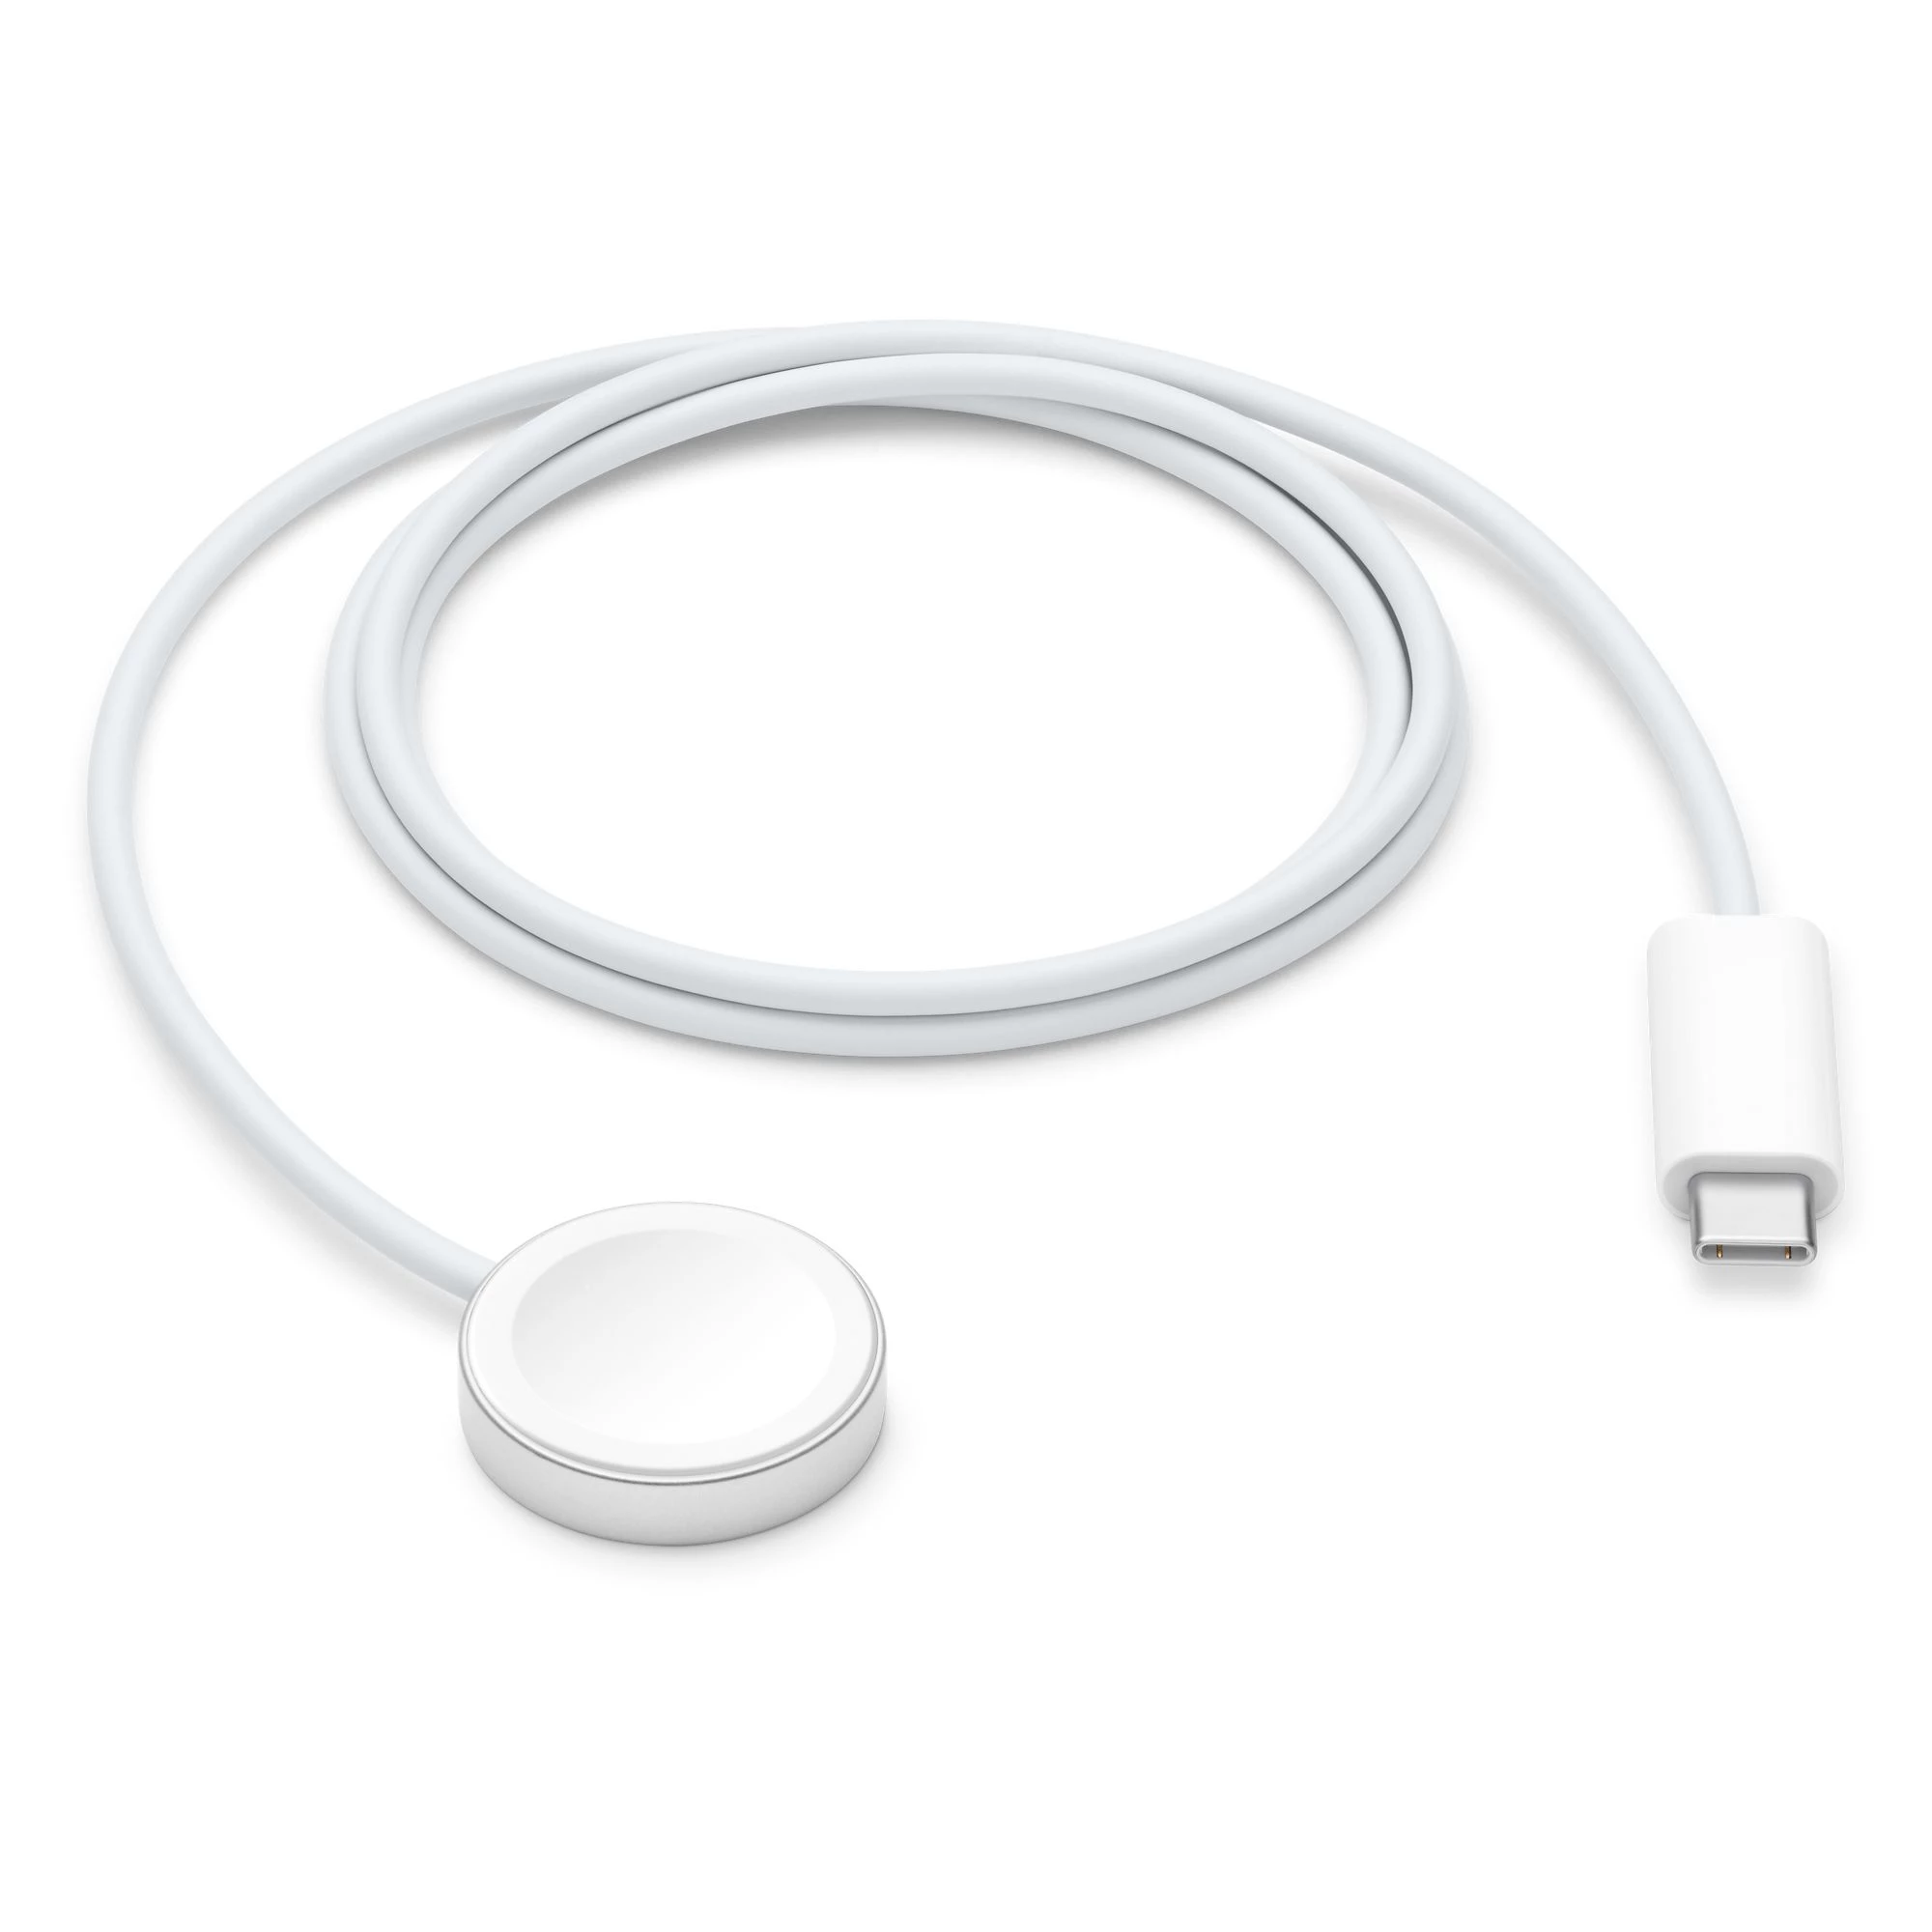 Apple Watch Magnetic Charger to USB-C Cable (0.3 m) (MU9K2/MX2J2)